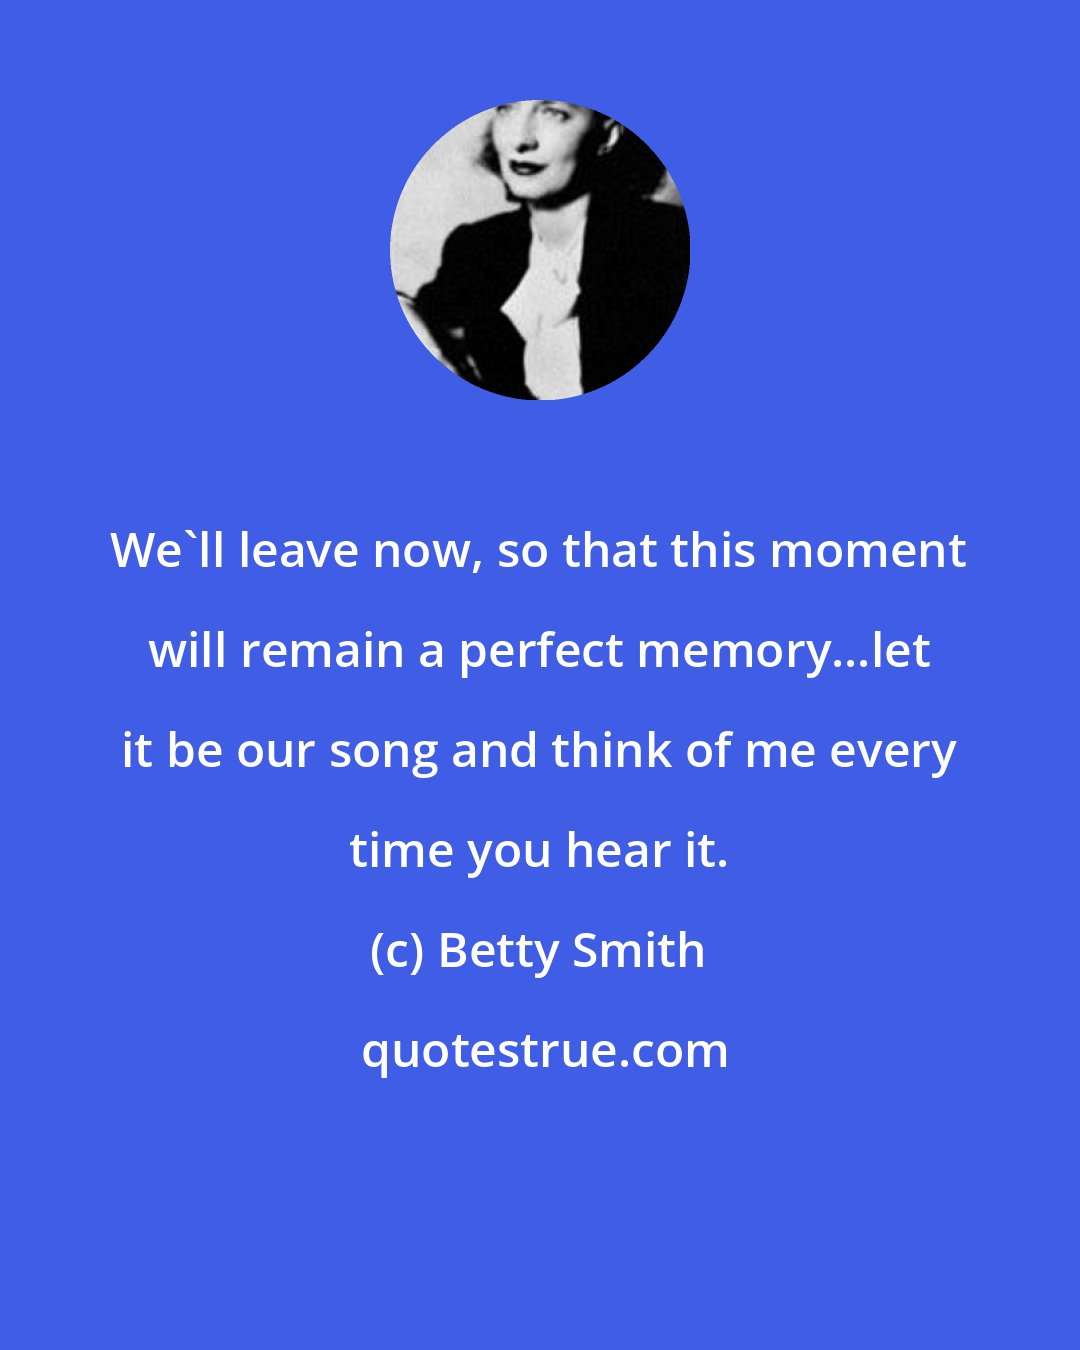 Betty Smith: We'll leave now, so that this moment will remain a perfect memory...let it be our song and think of me every time you hear it.